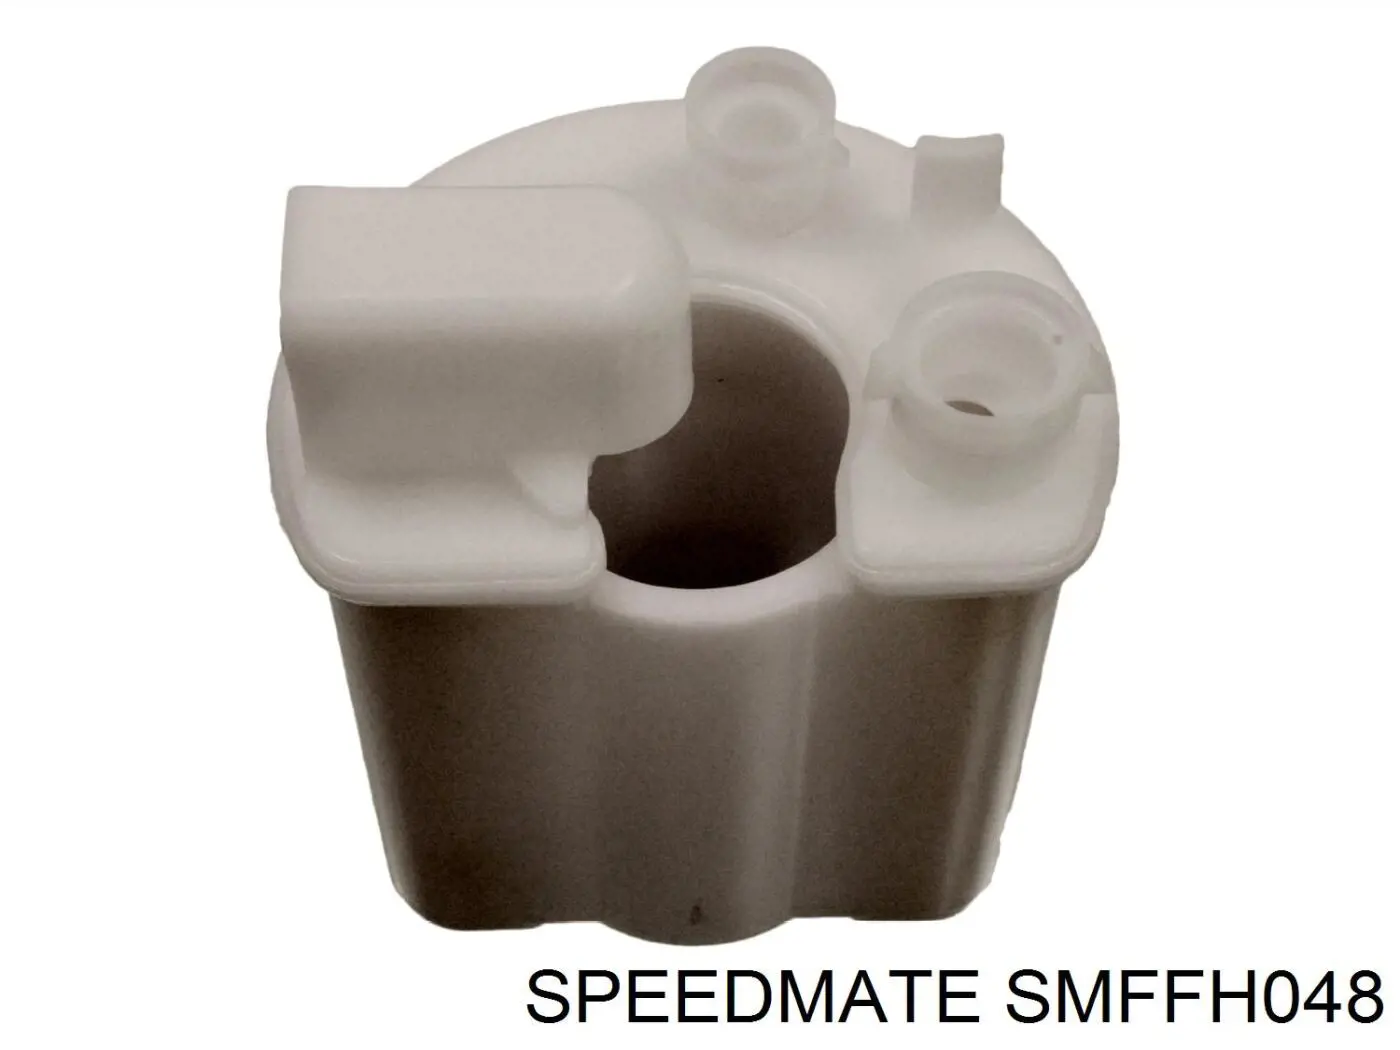 SMFFH048 Speedmate filtro combustible